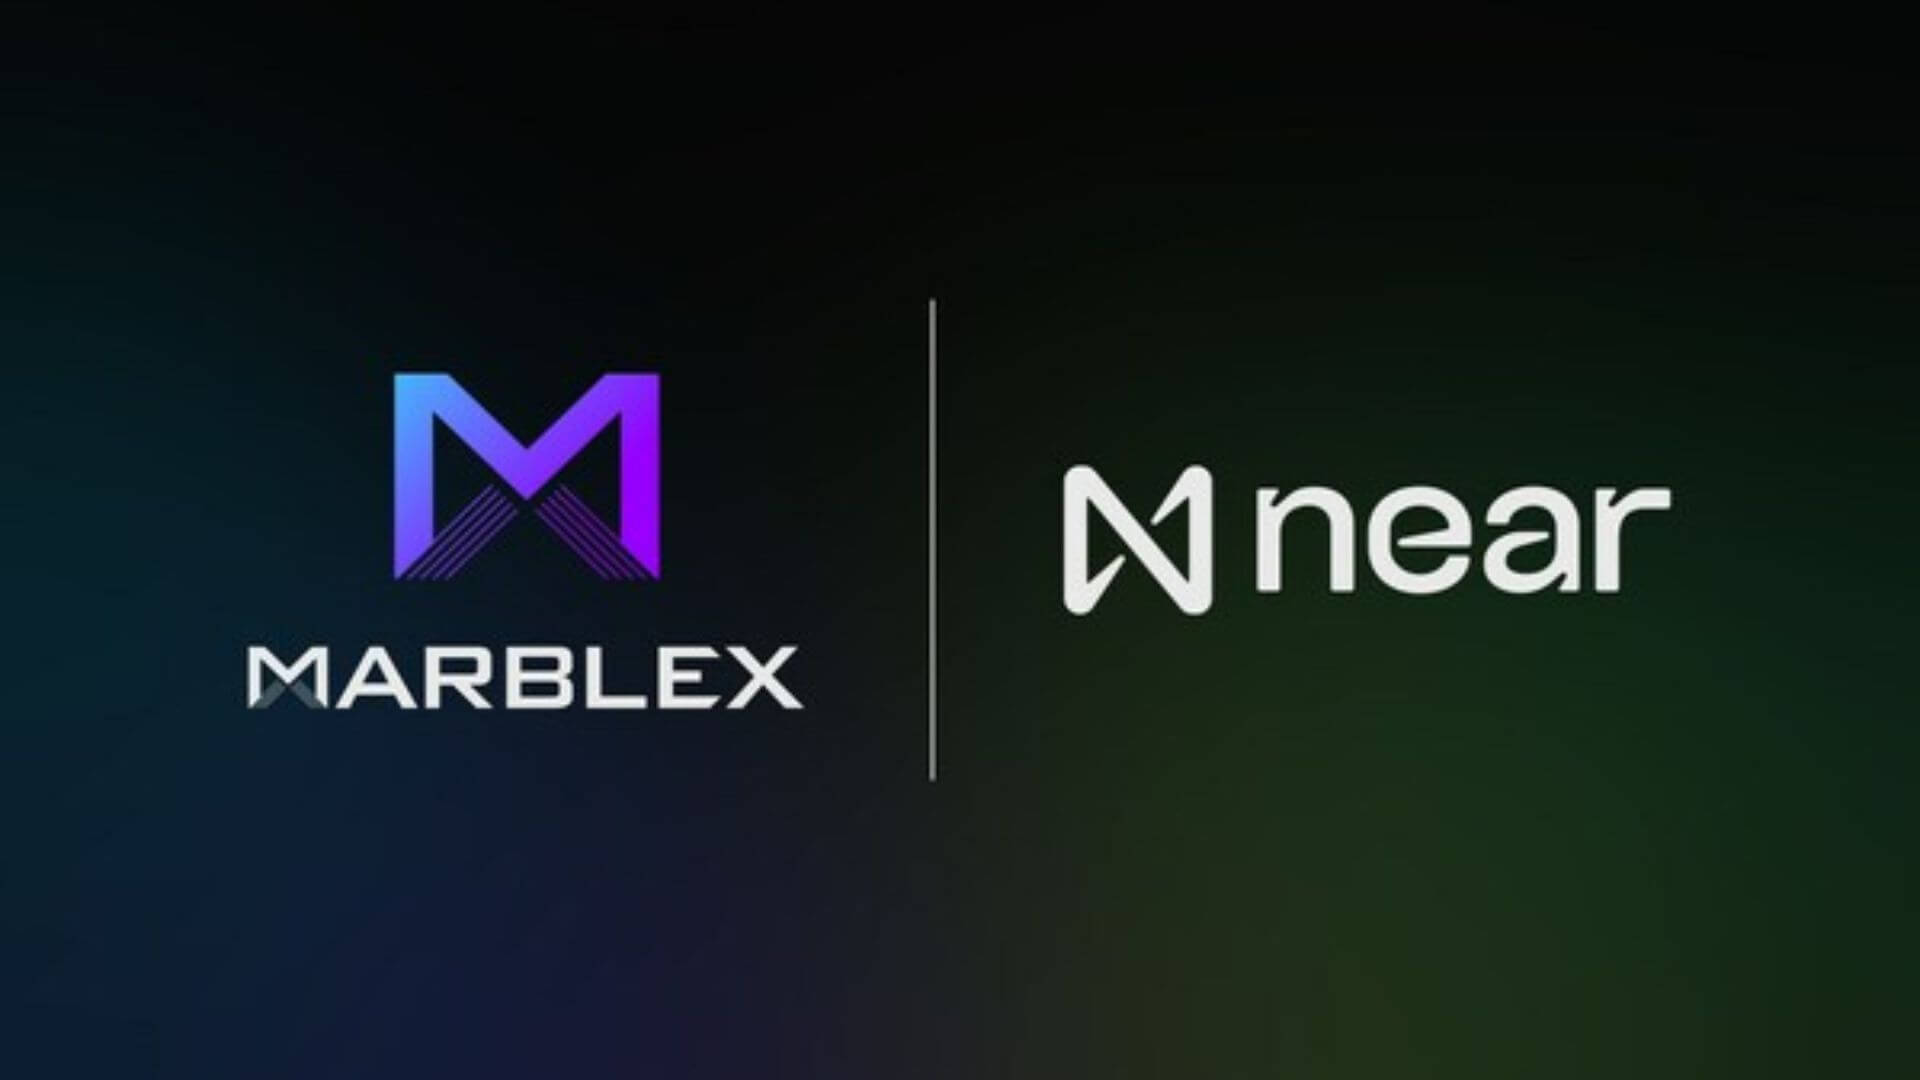 NEAR Foundation Forms Strategic Partnership with MARBLEX to Expand Web3 Ecosystem